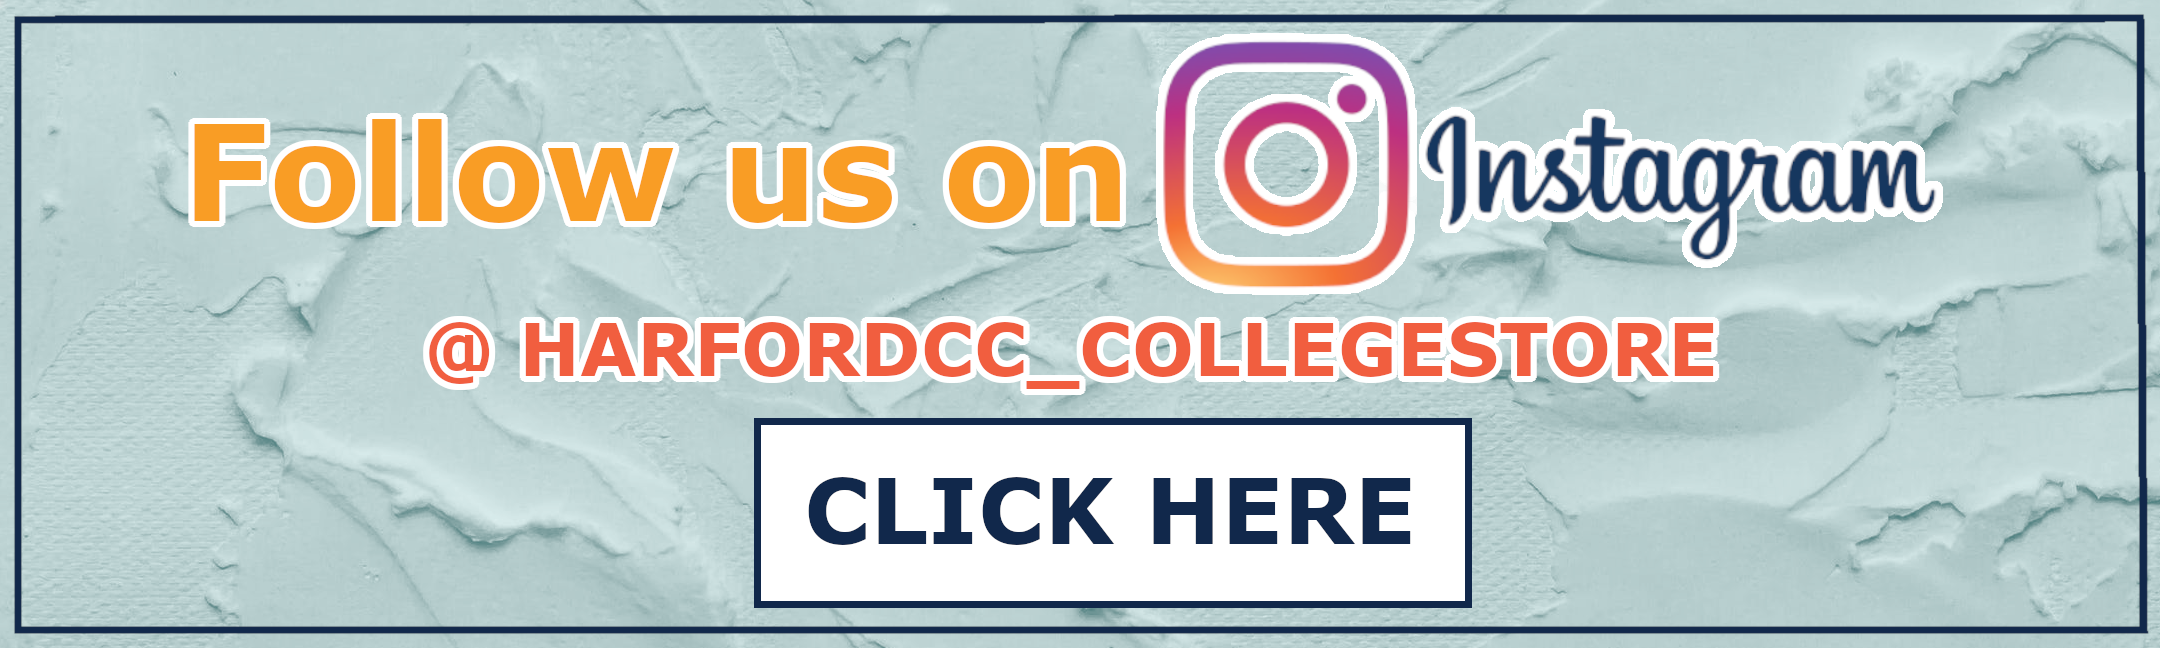 Follow us on Instagram @ HARFORDCC_COLLEGESTORE